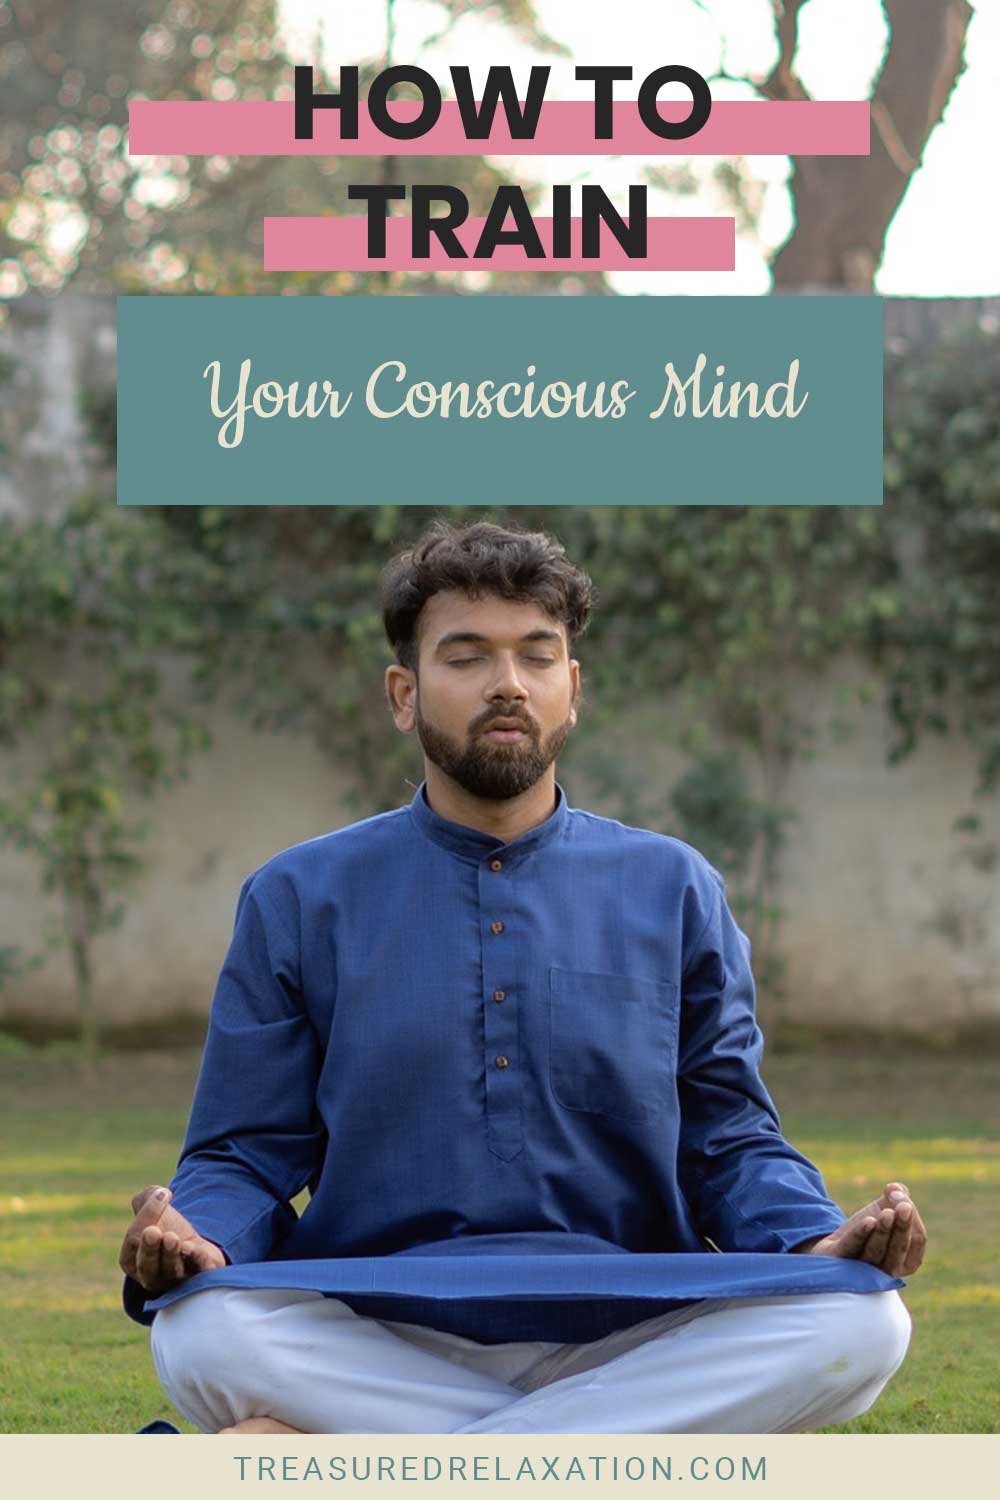 Man wearing blue shirt meditating on backyard - How to Train Your Conscious Mind?